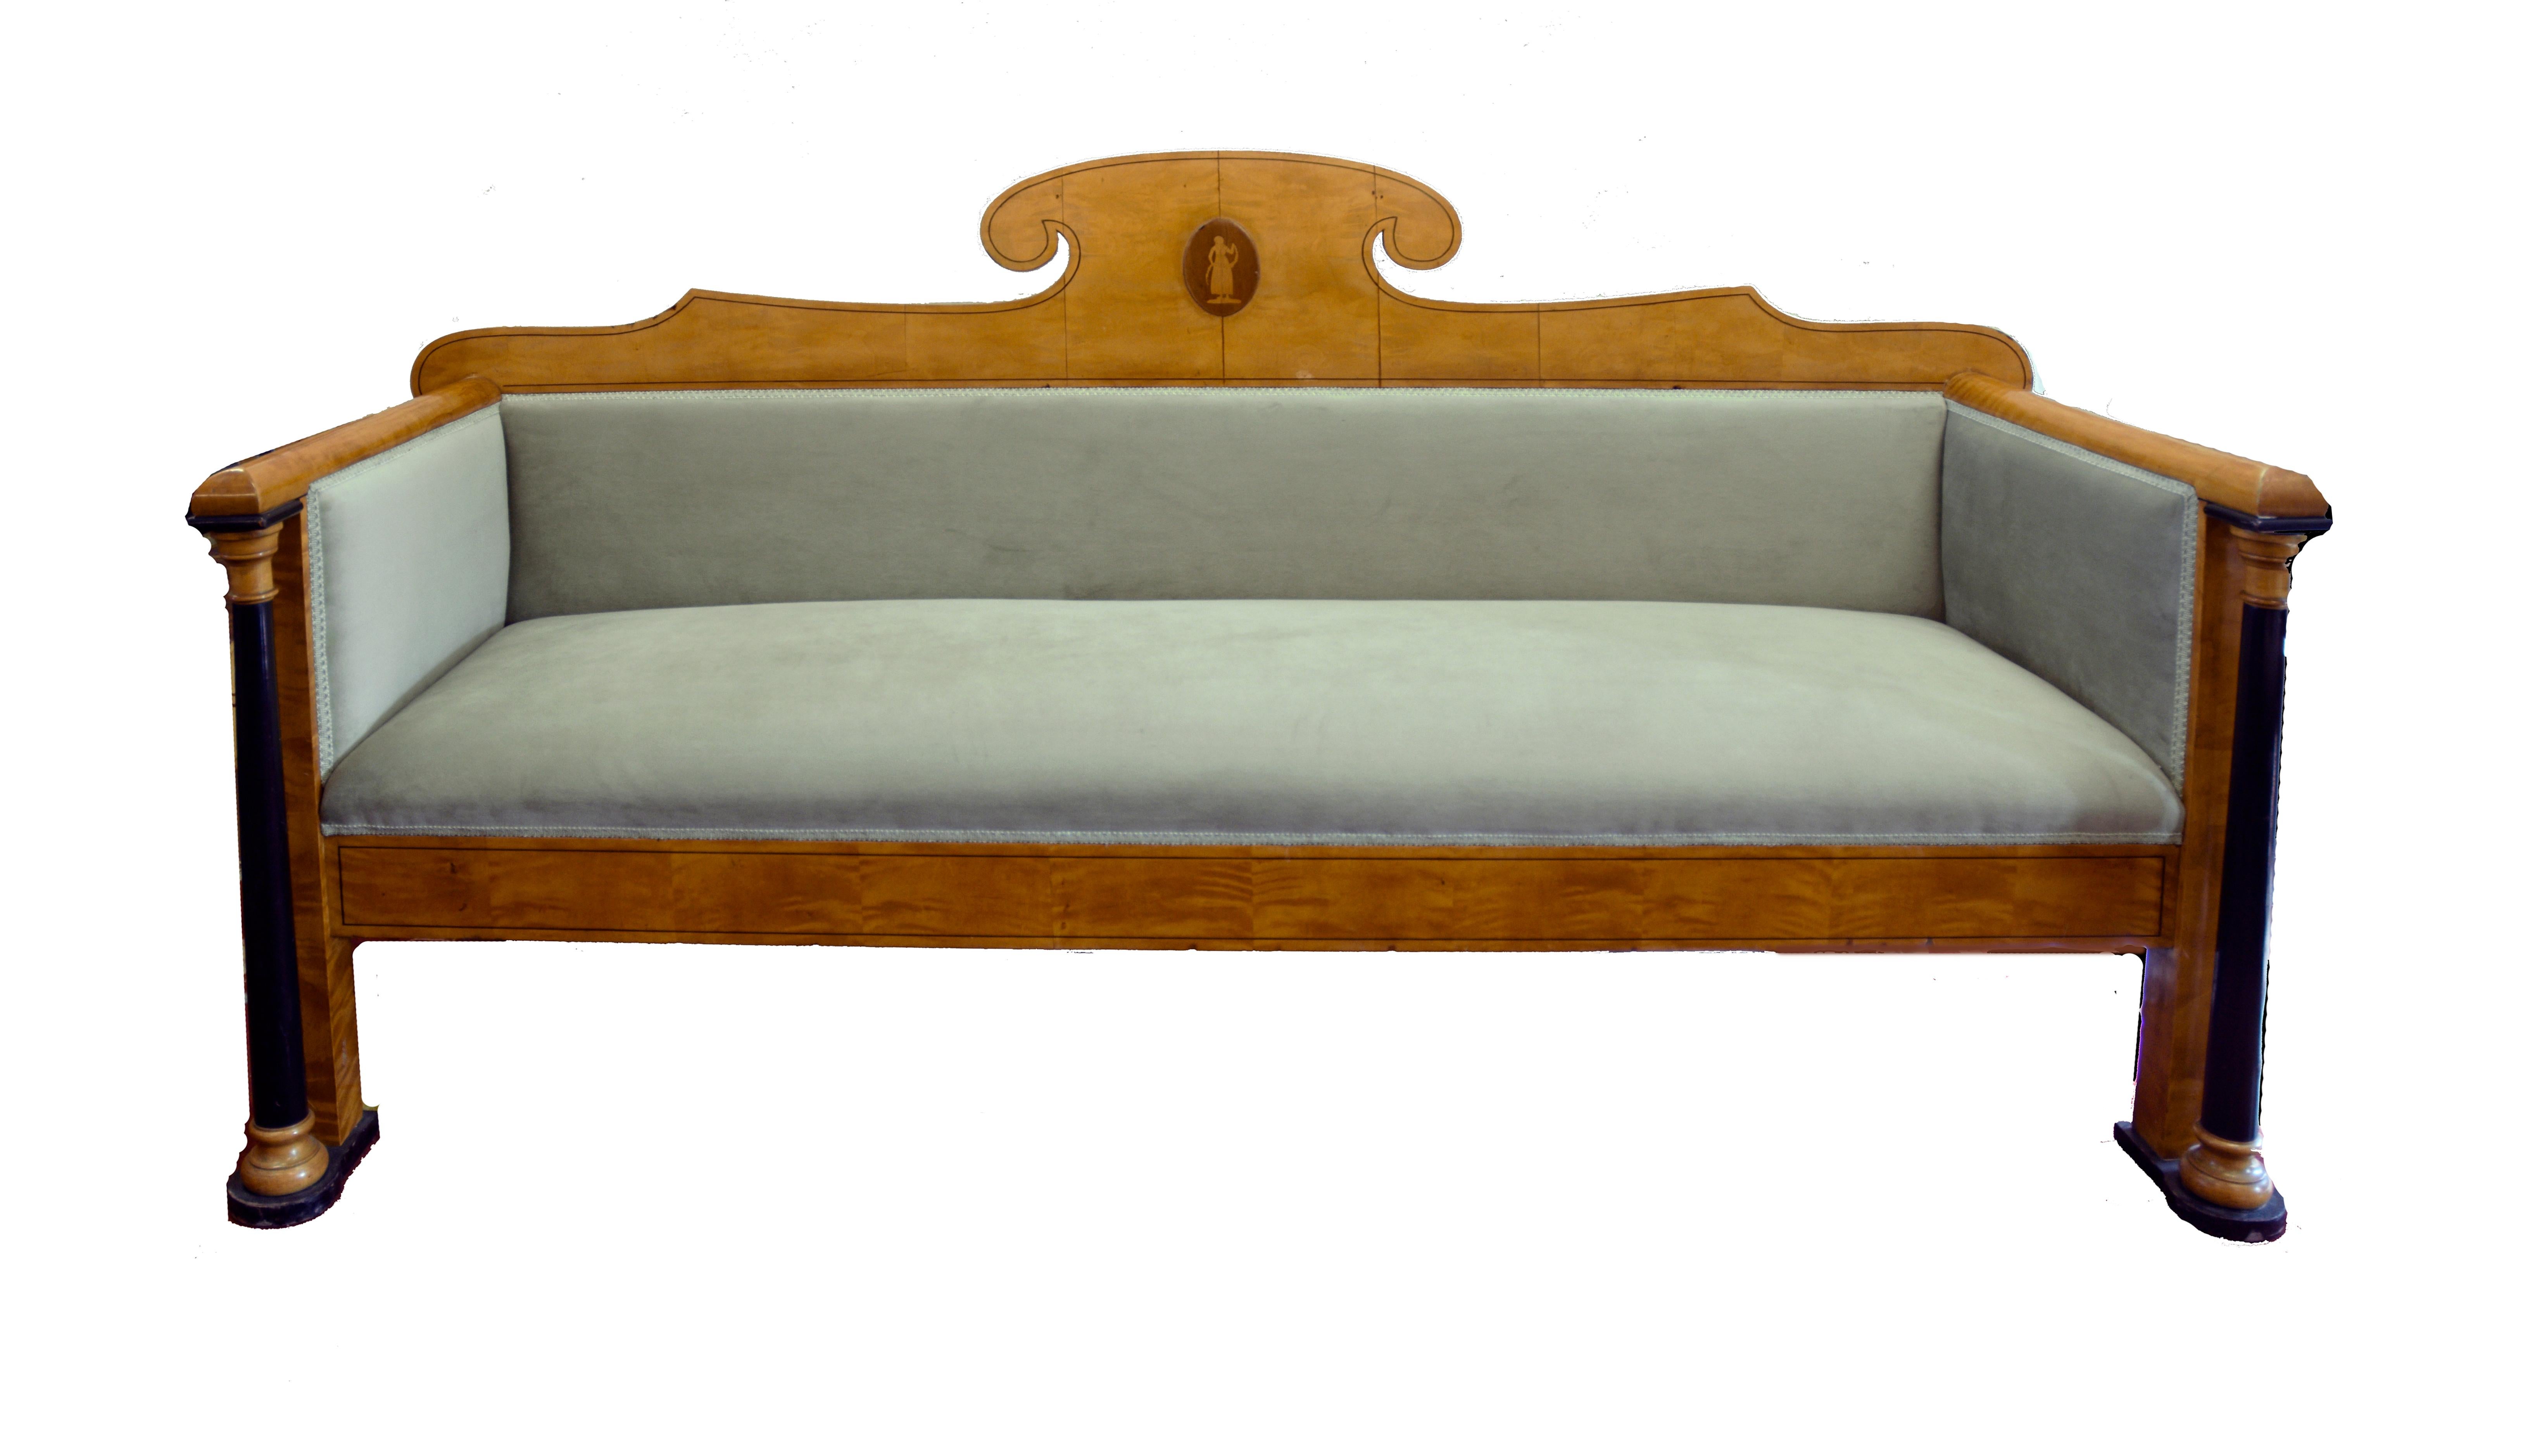 Wonderful lines on this Swedish style Biedermeier period sofa or bench. Lovely crushed velvet in pale green. Maple construction with the flourishes of black lacquer finish. Size 82